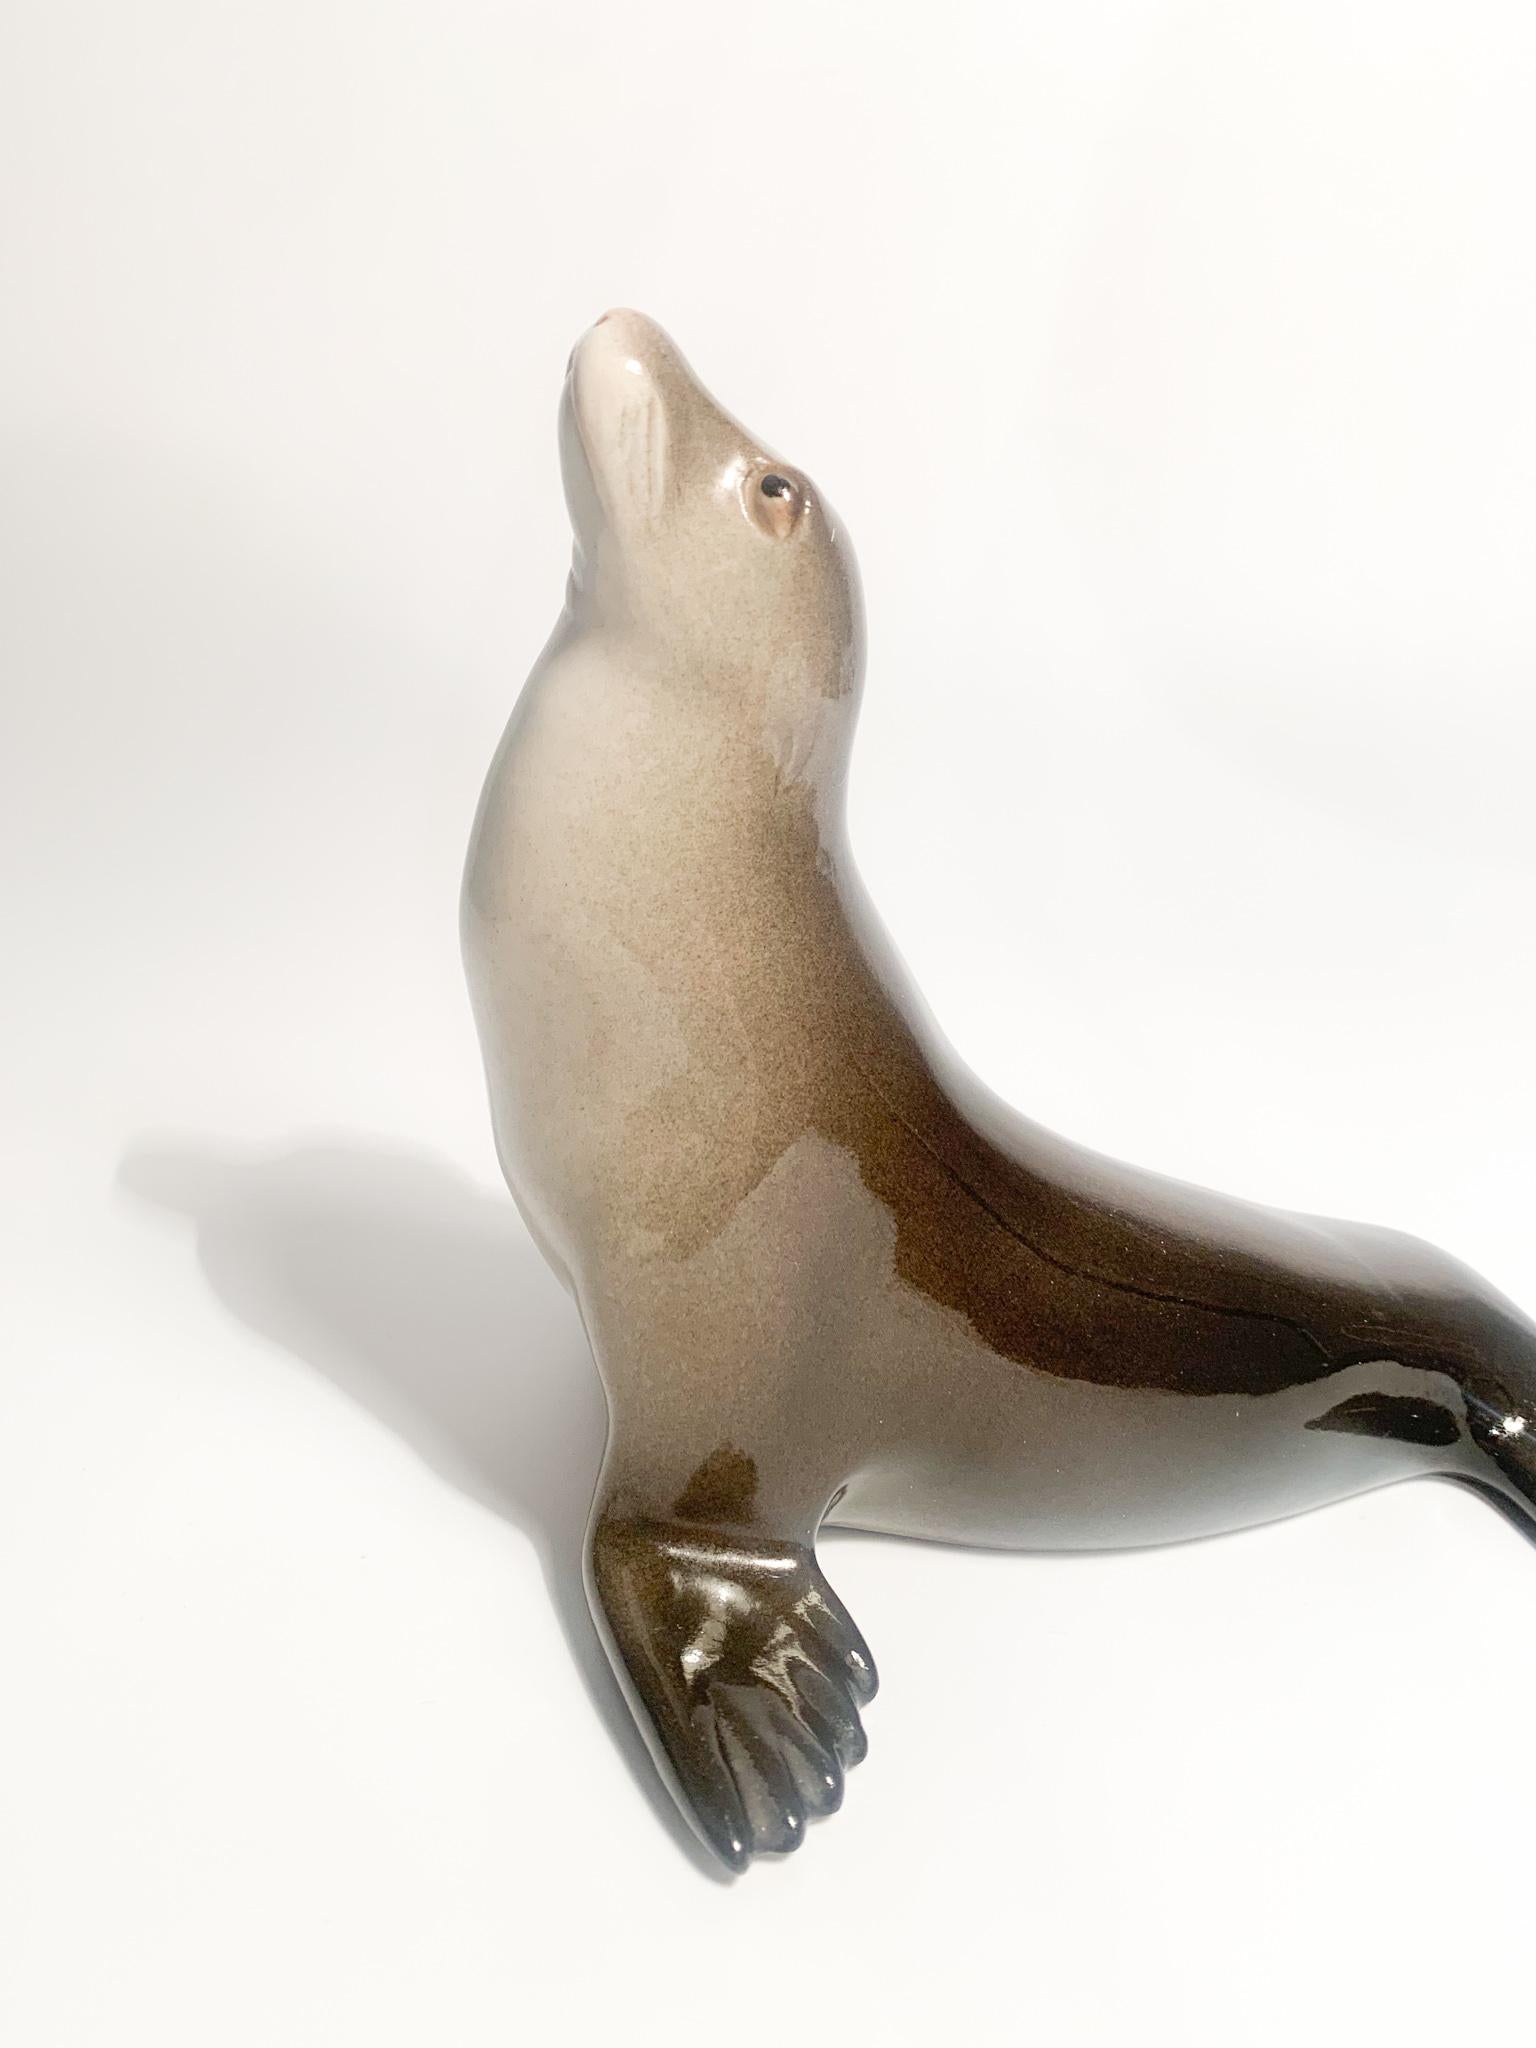 URSS Ceramic Sculpture of a Seal from the 1940s For Sale 5